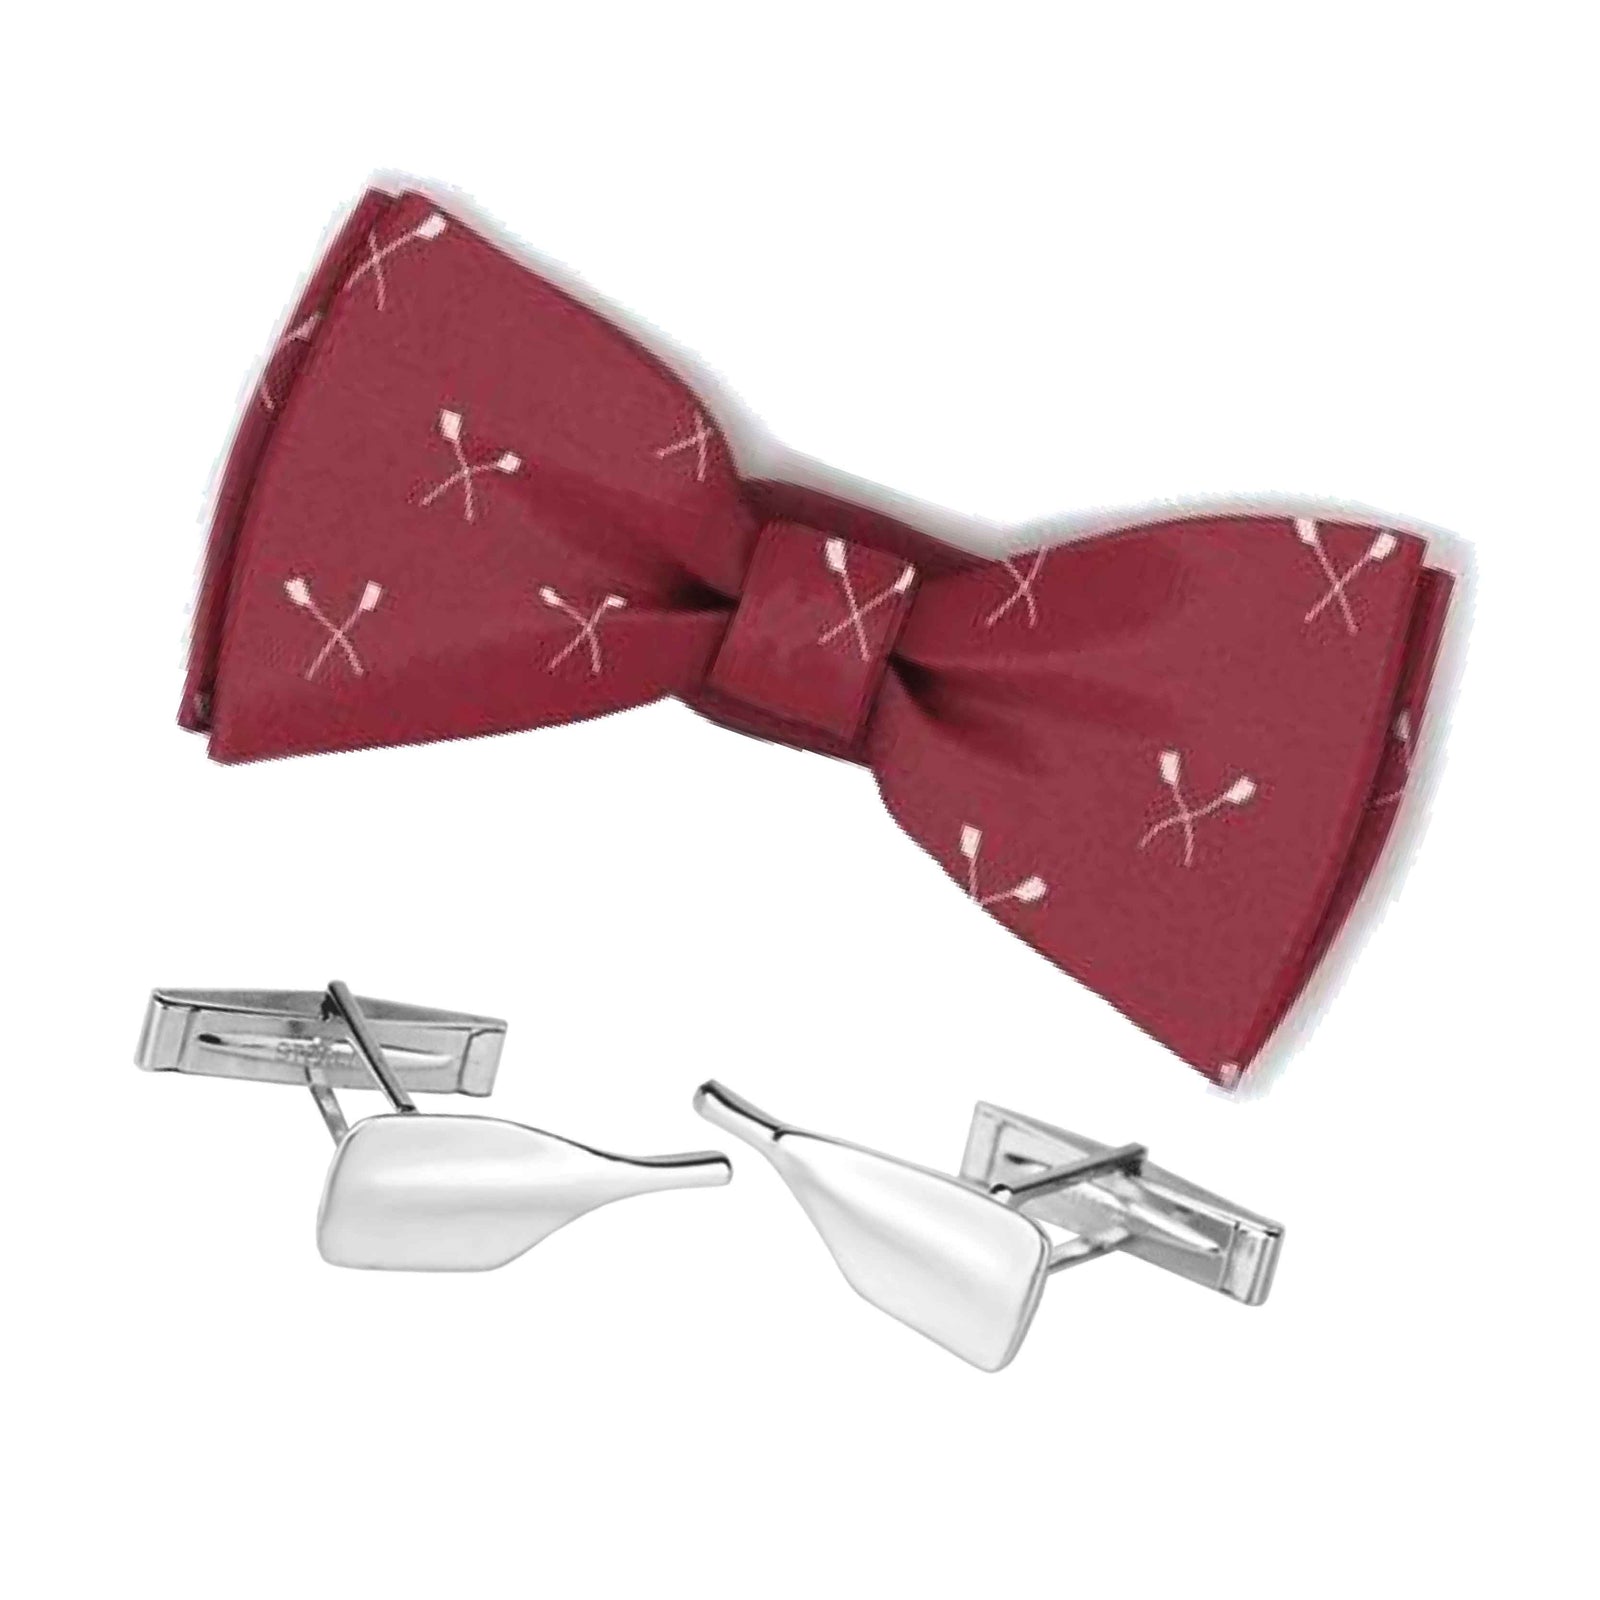 Rowing Bowtie and Cleaver Cuff Links